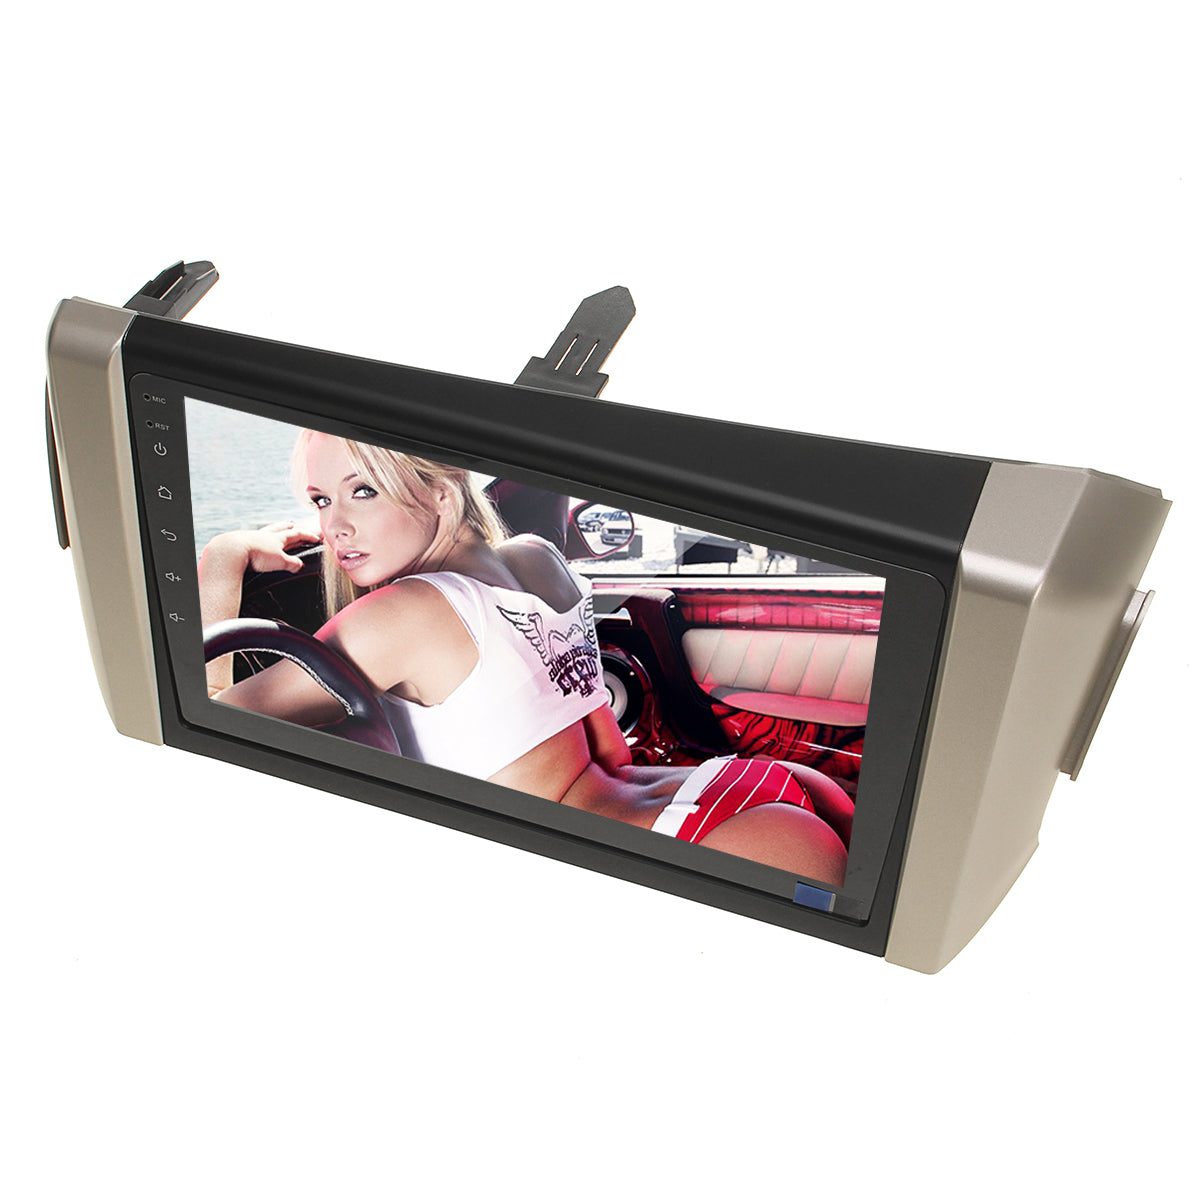 T3 9 Inch for Android 8.1 Car Radio Stereo 4 Core 1G+16GB Touch Screen GPS bluetooth Hands-free WIFI Rear view for Toyota Innvoa 15-18 Core board integrator - Auto GoShop